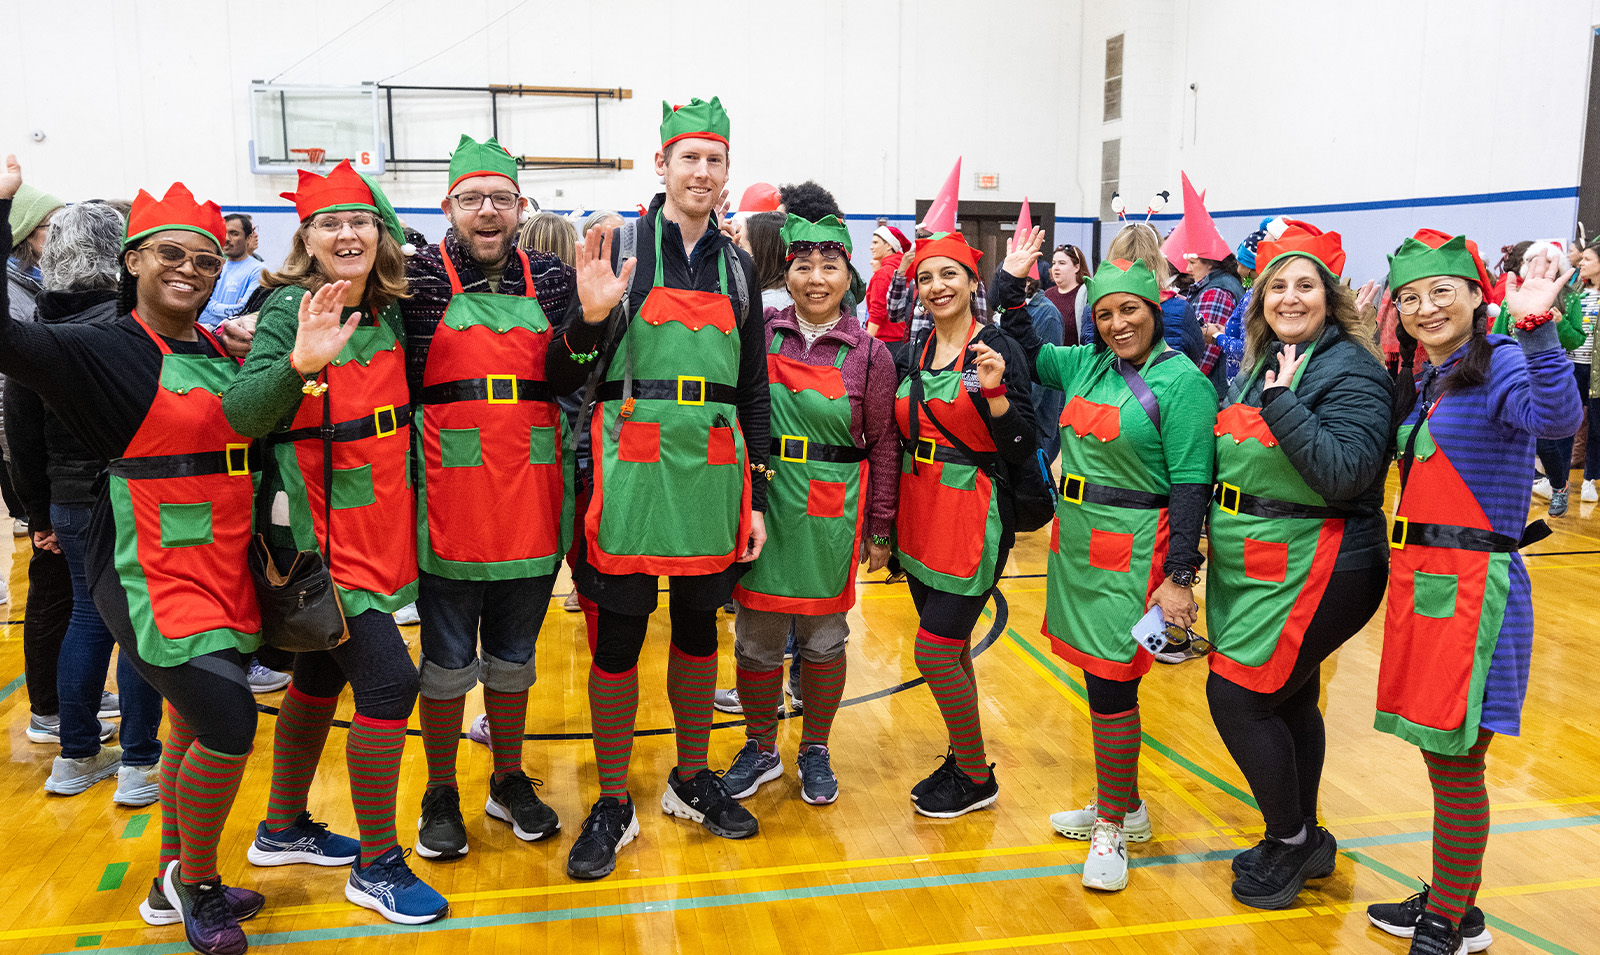 A group of employees dressed up as elves posing for a group photo in a gym.